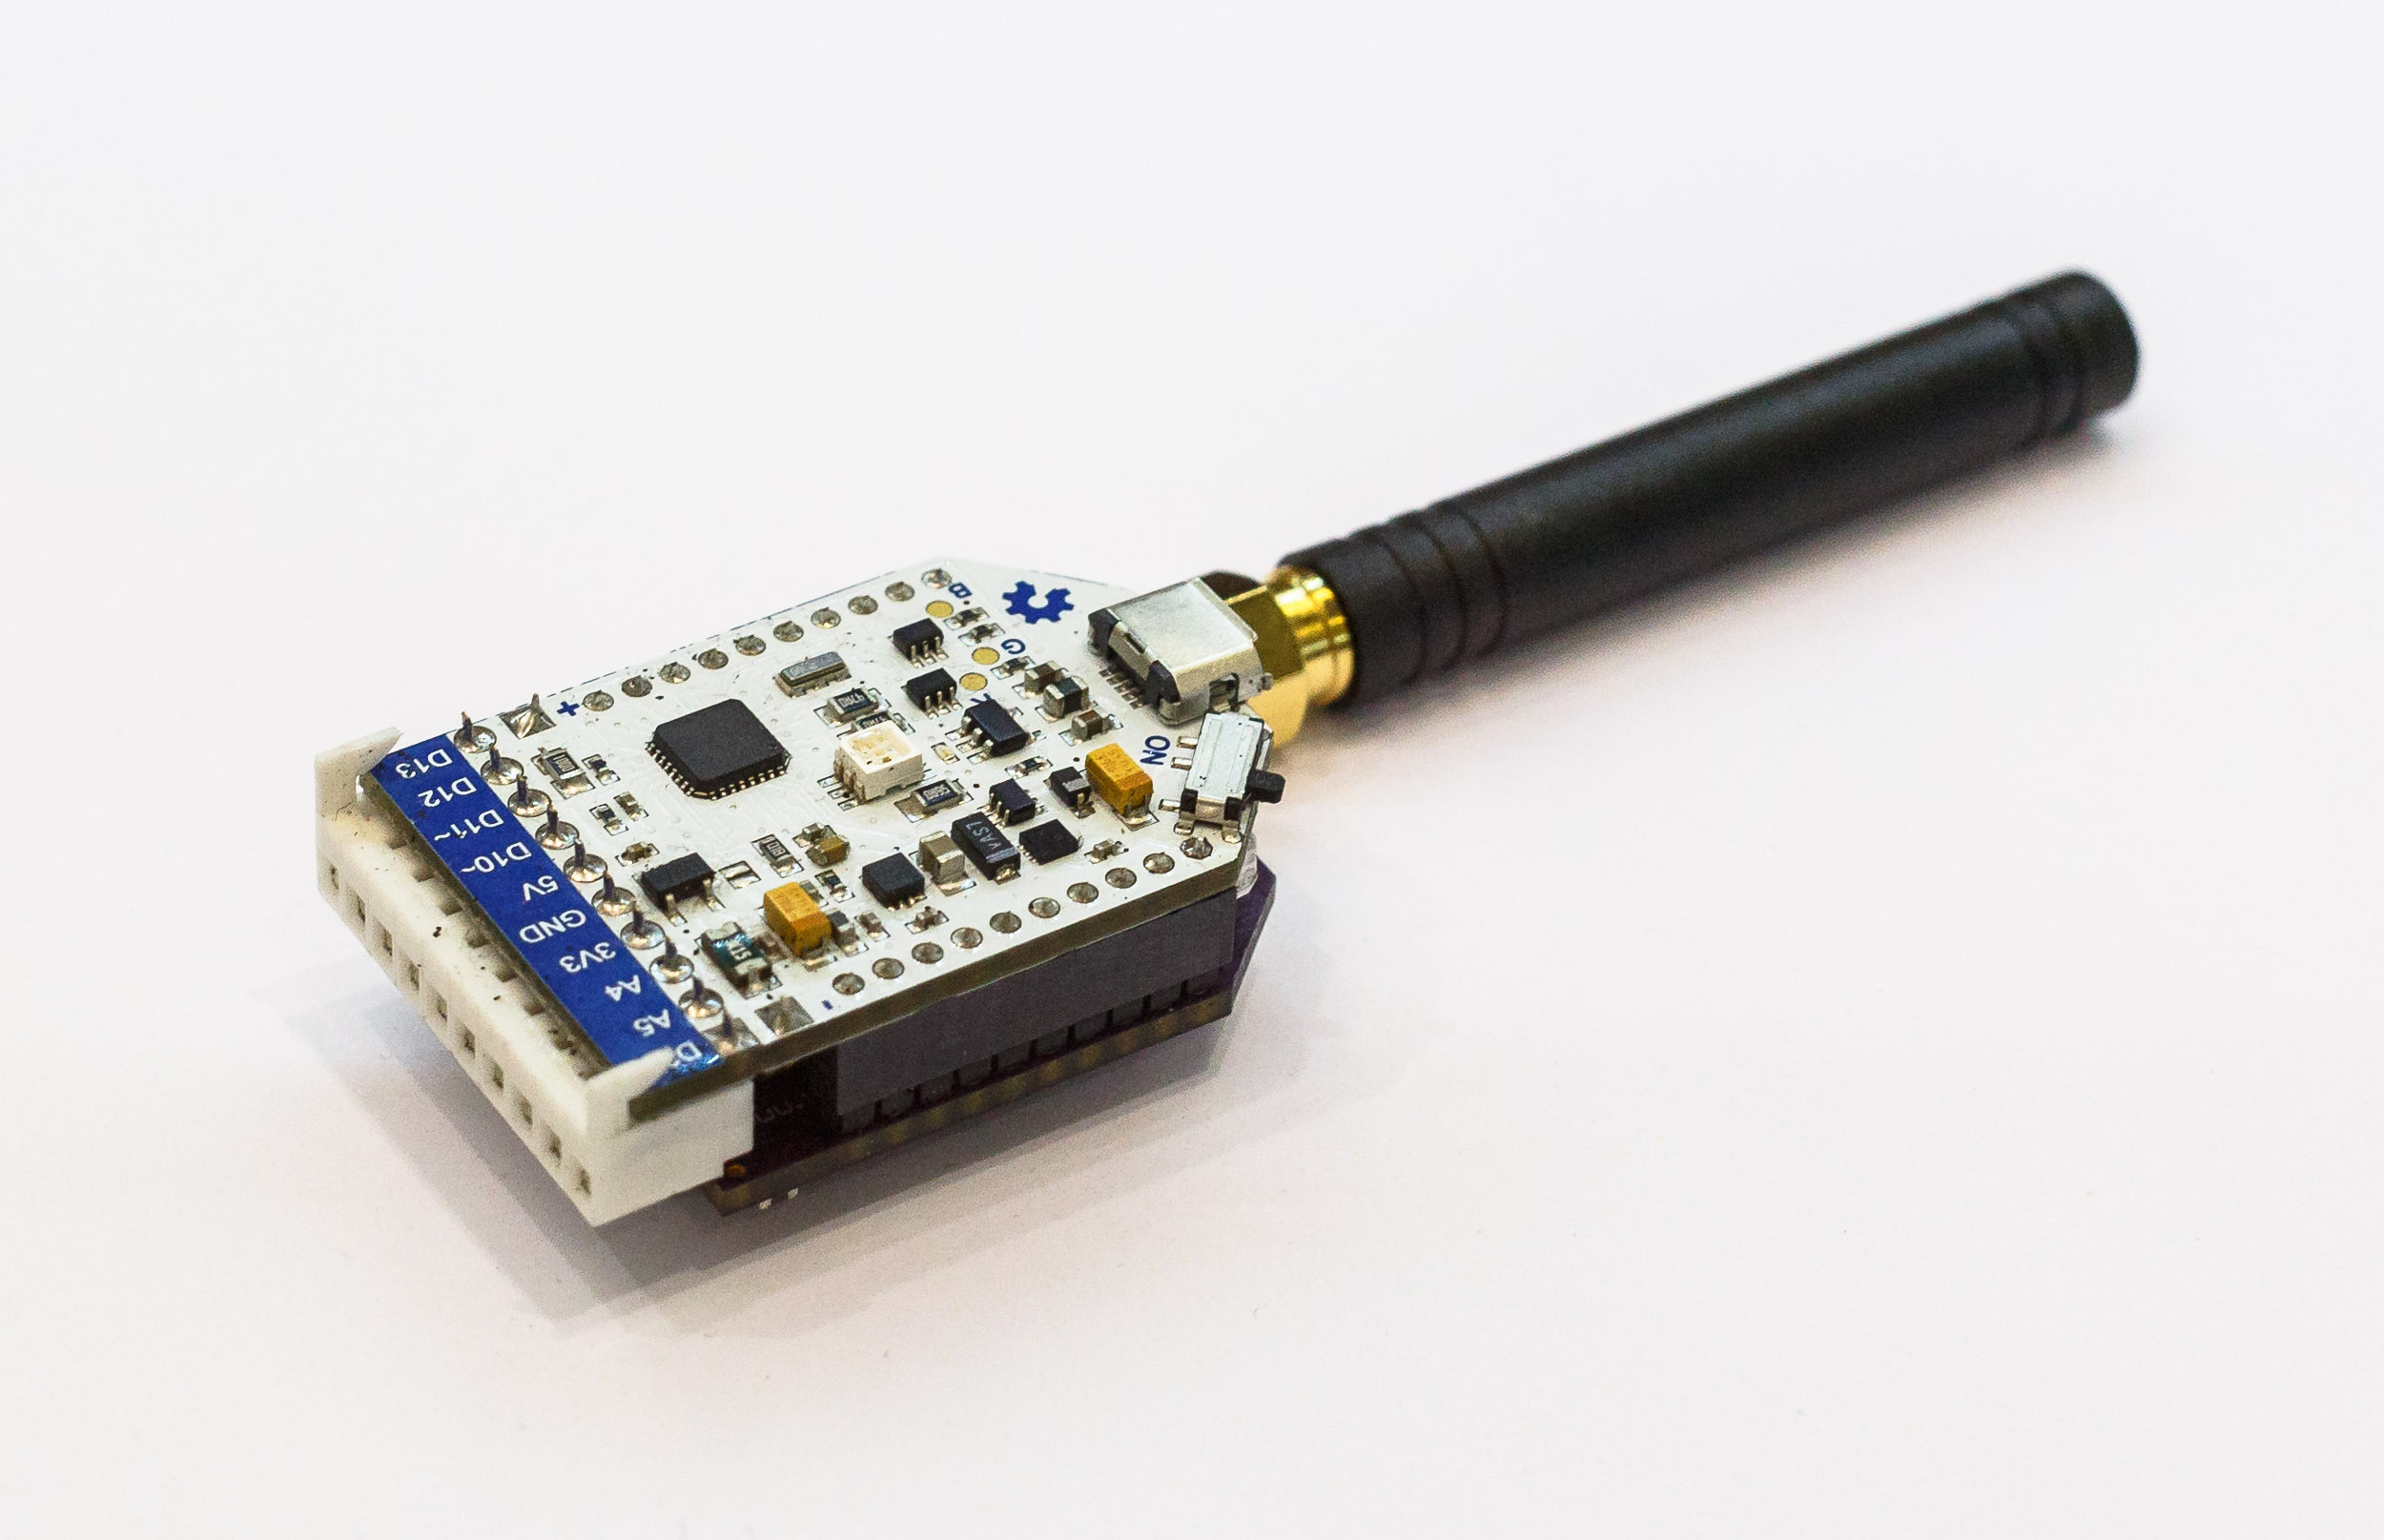 The Airboard is a super-small development device for people wanting to get started with Sigfox networking. It's geared for the hobbyist set who might want just a single device.